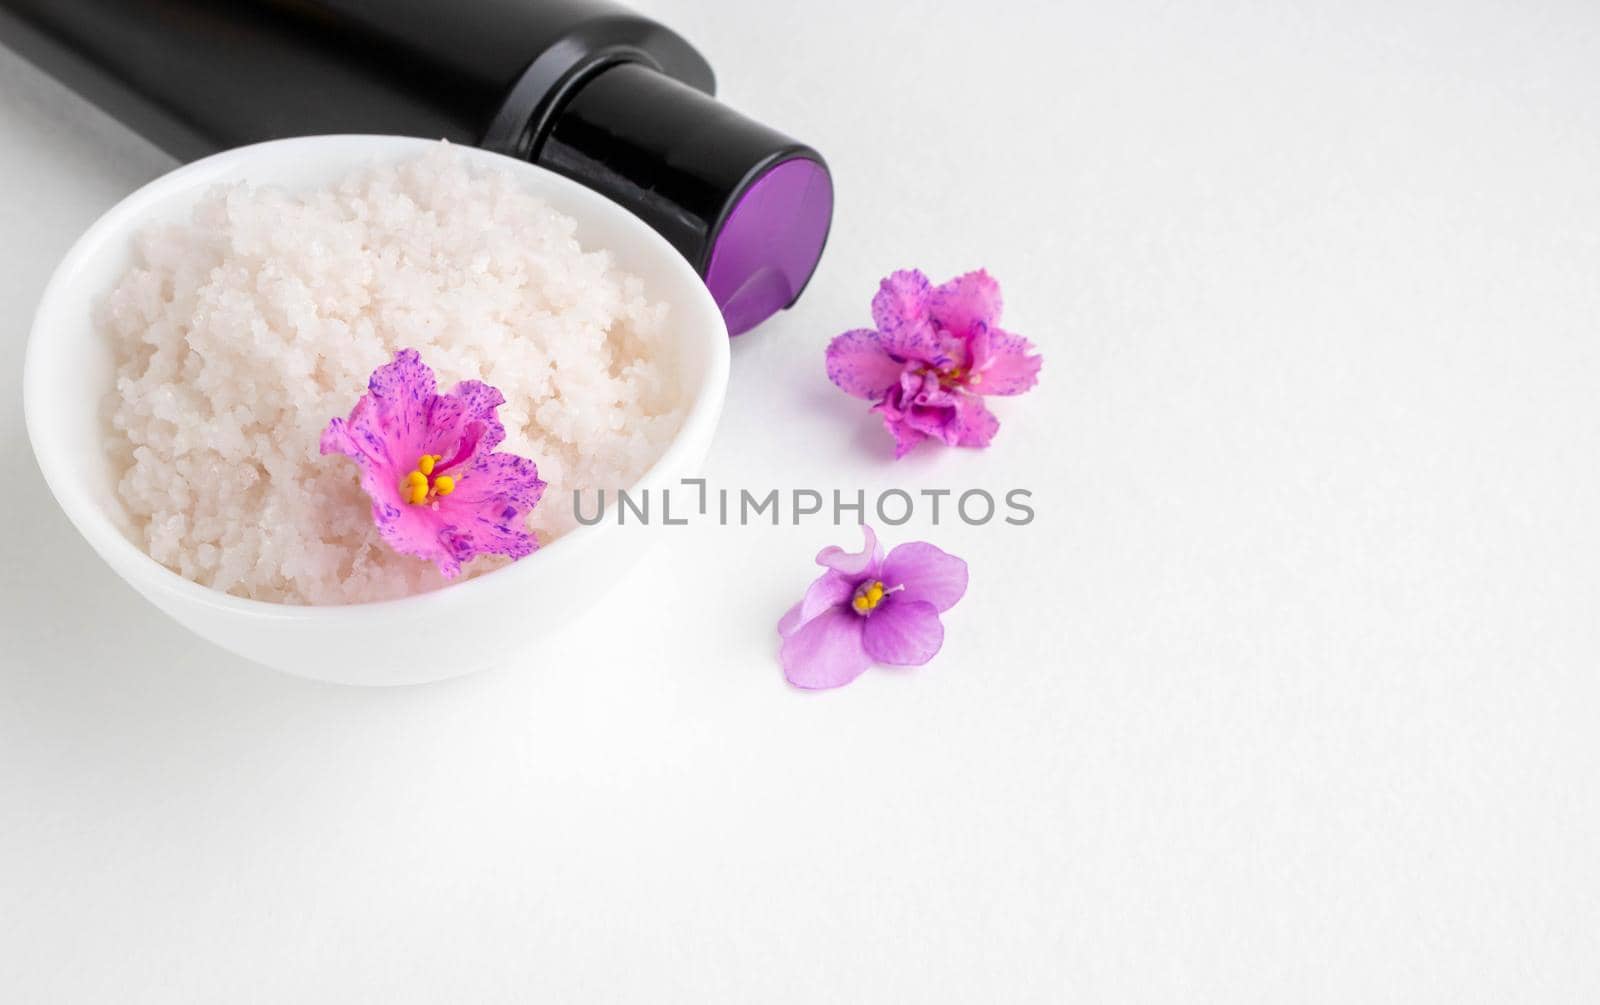 An oval white bowl with pink salt stands on a white background next to it are a black bottle and violet flowers by lapushka62